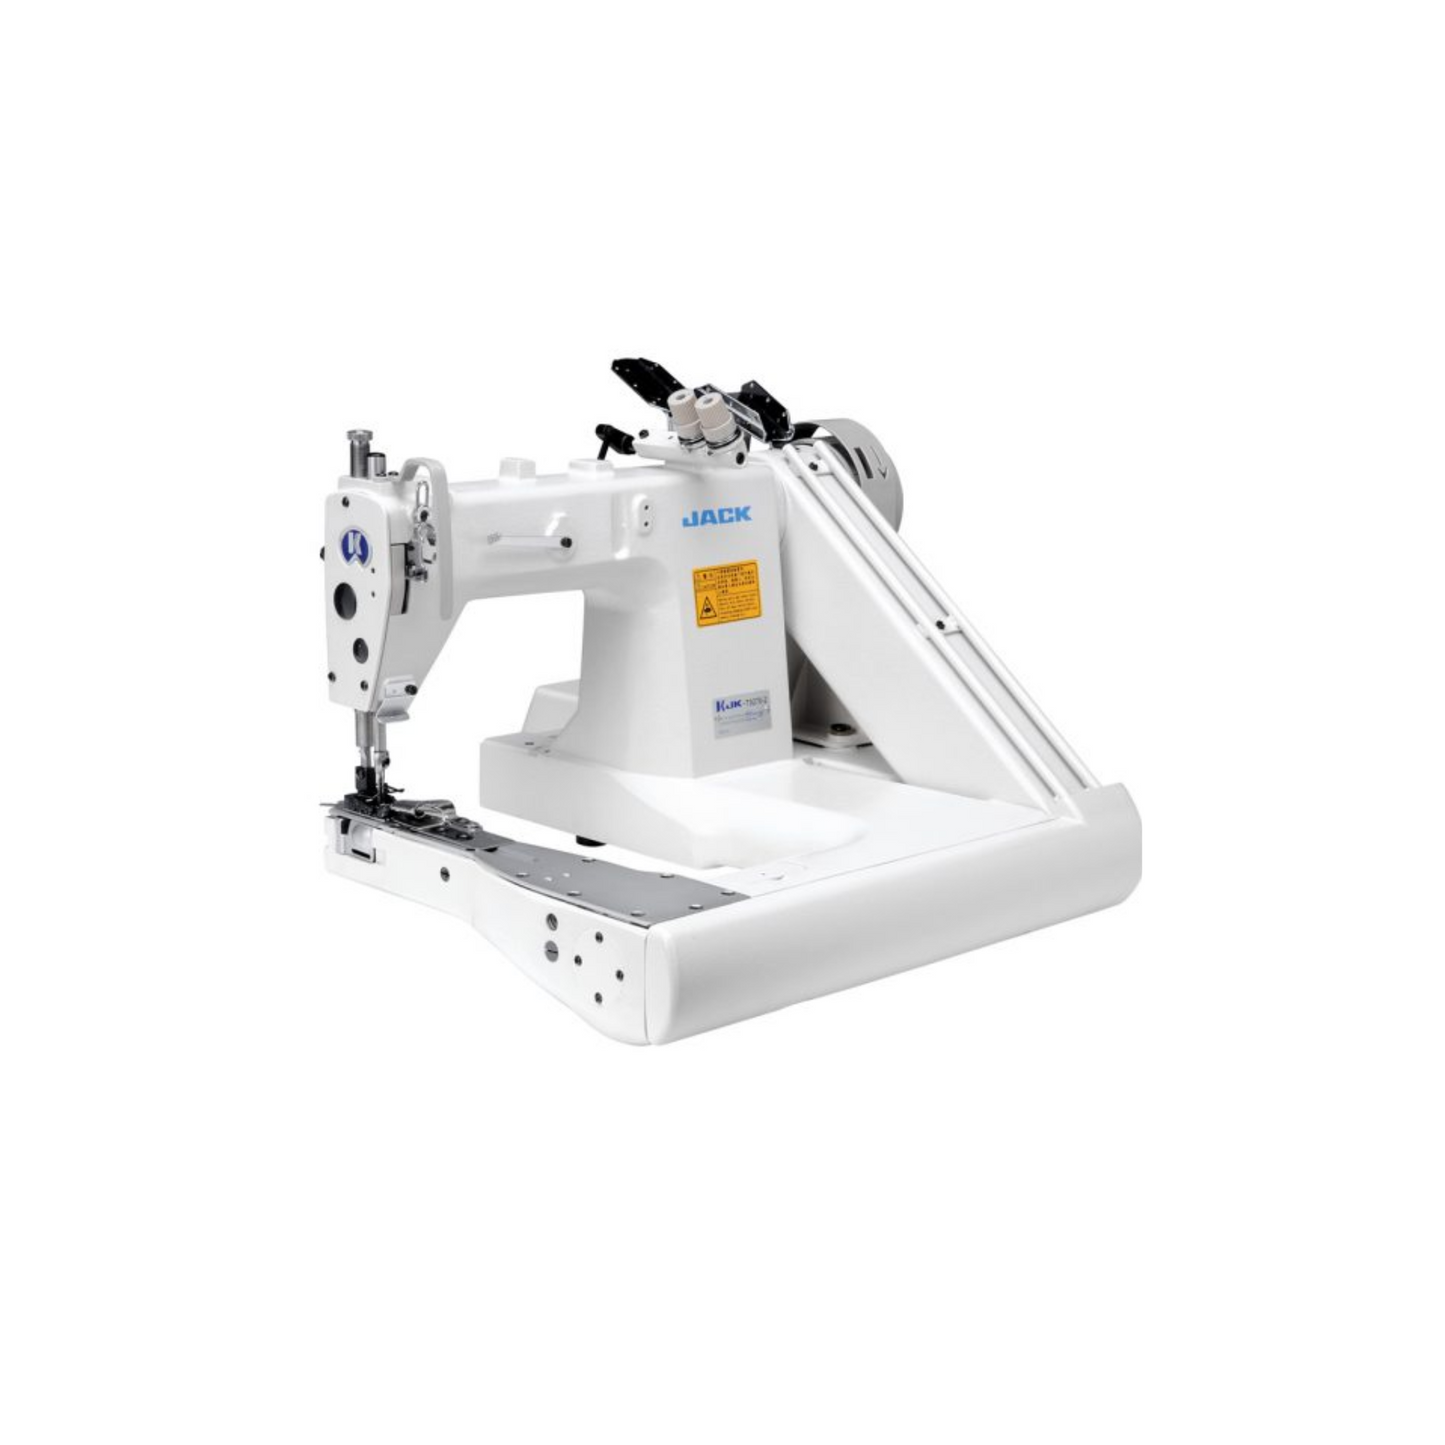 Jack K-T9280-73-PS / JK-T9270-PL feed of the arm - Sewing machine - White - Front view